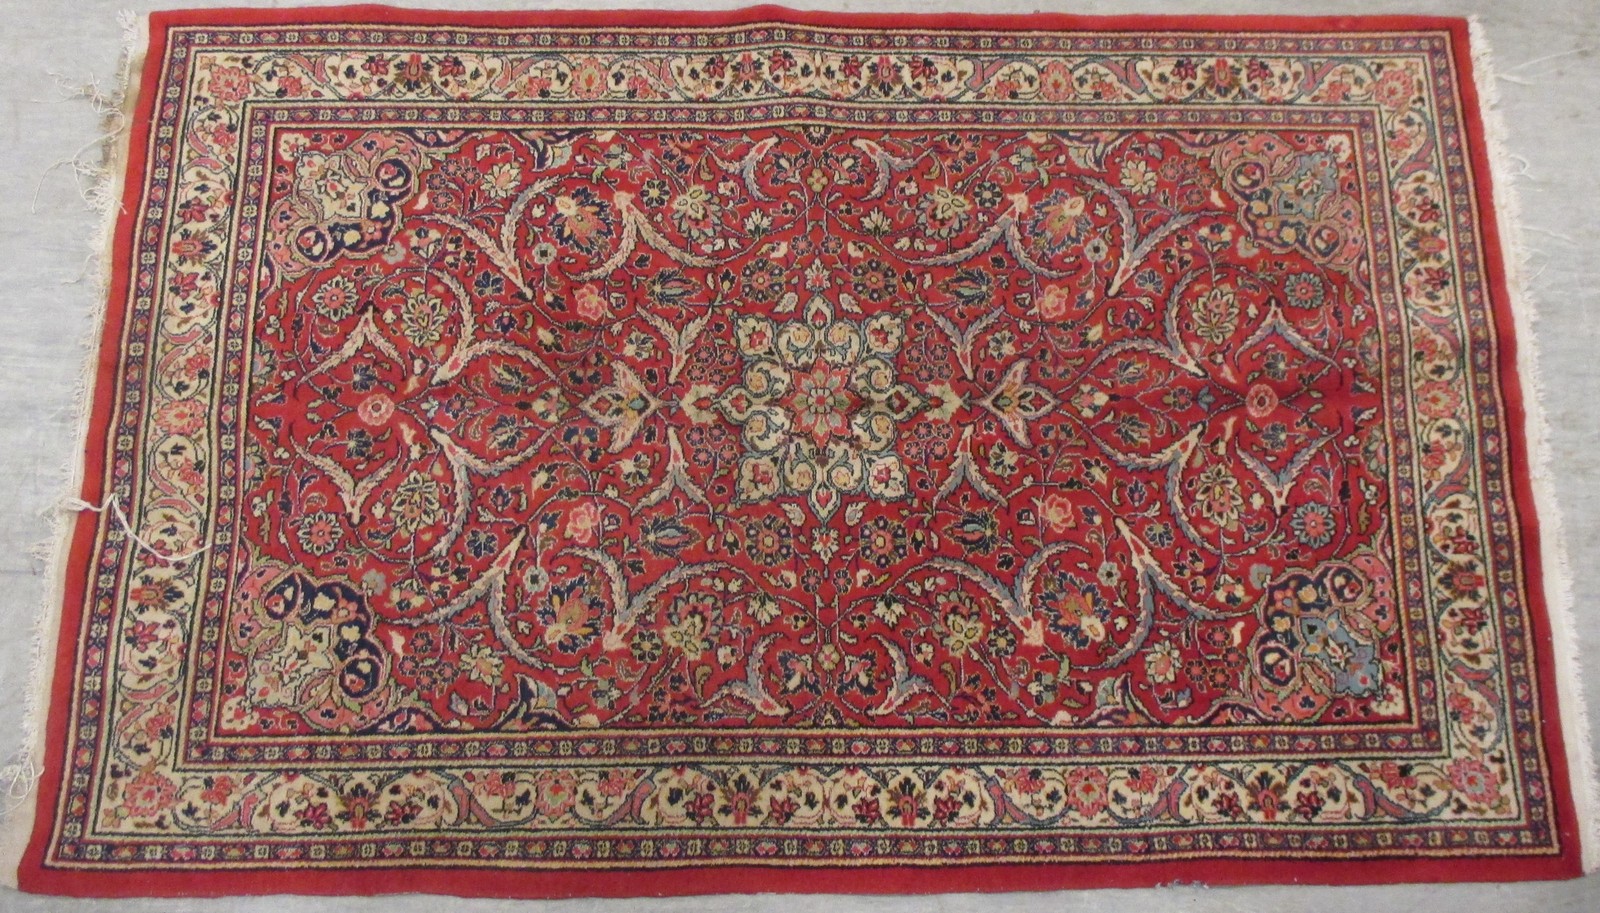 An Persian rug on a red ground with multiple borders, 213 x 133cm